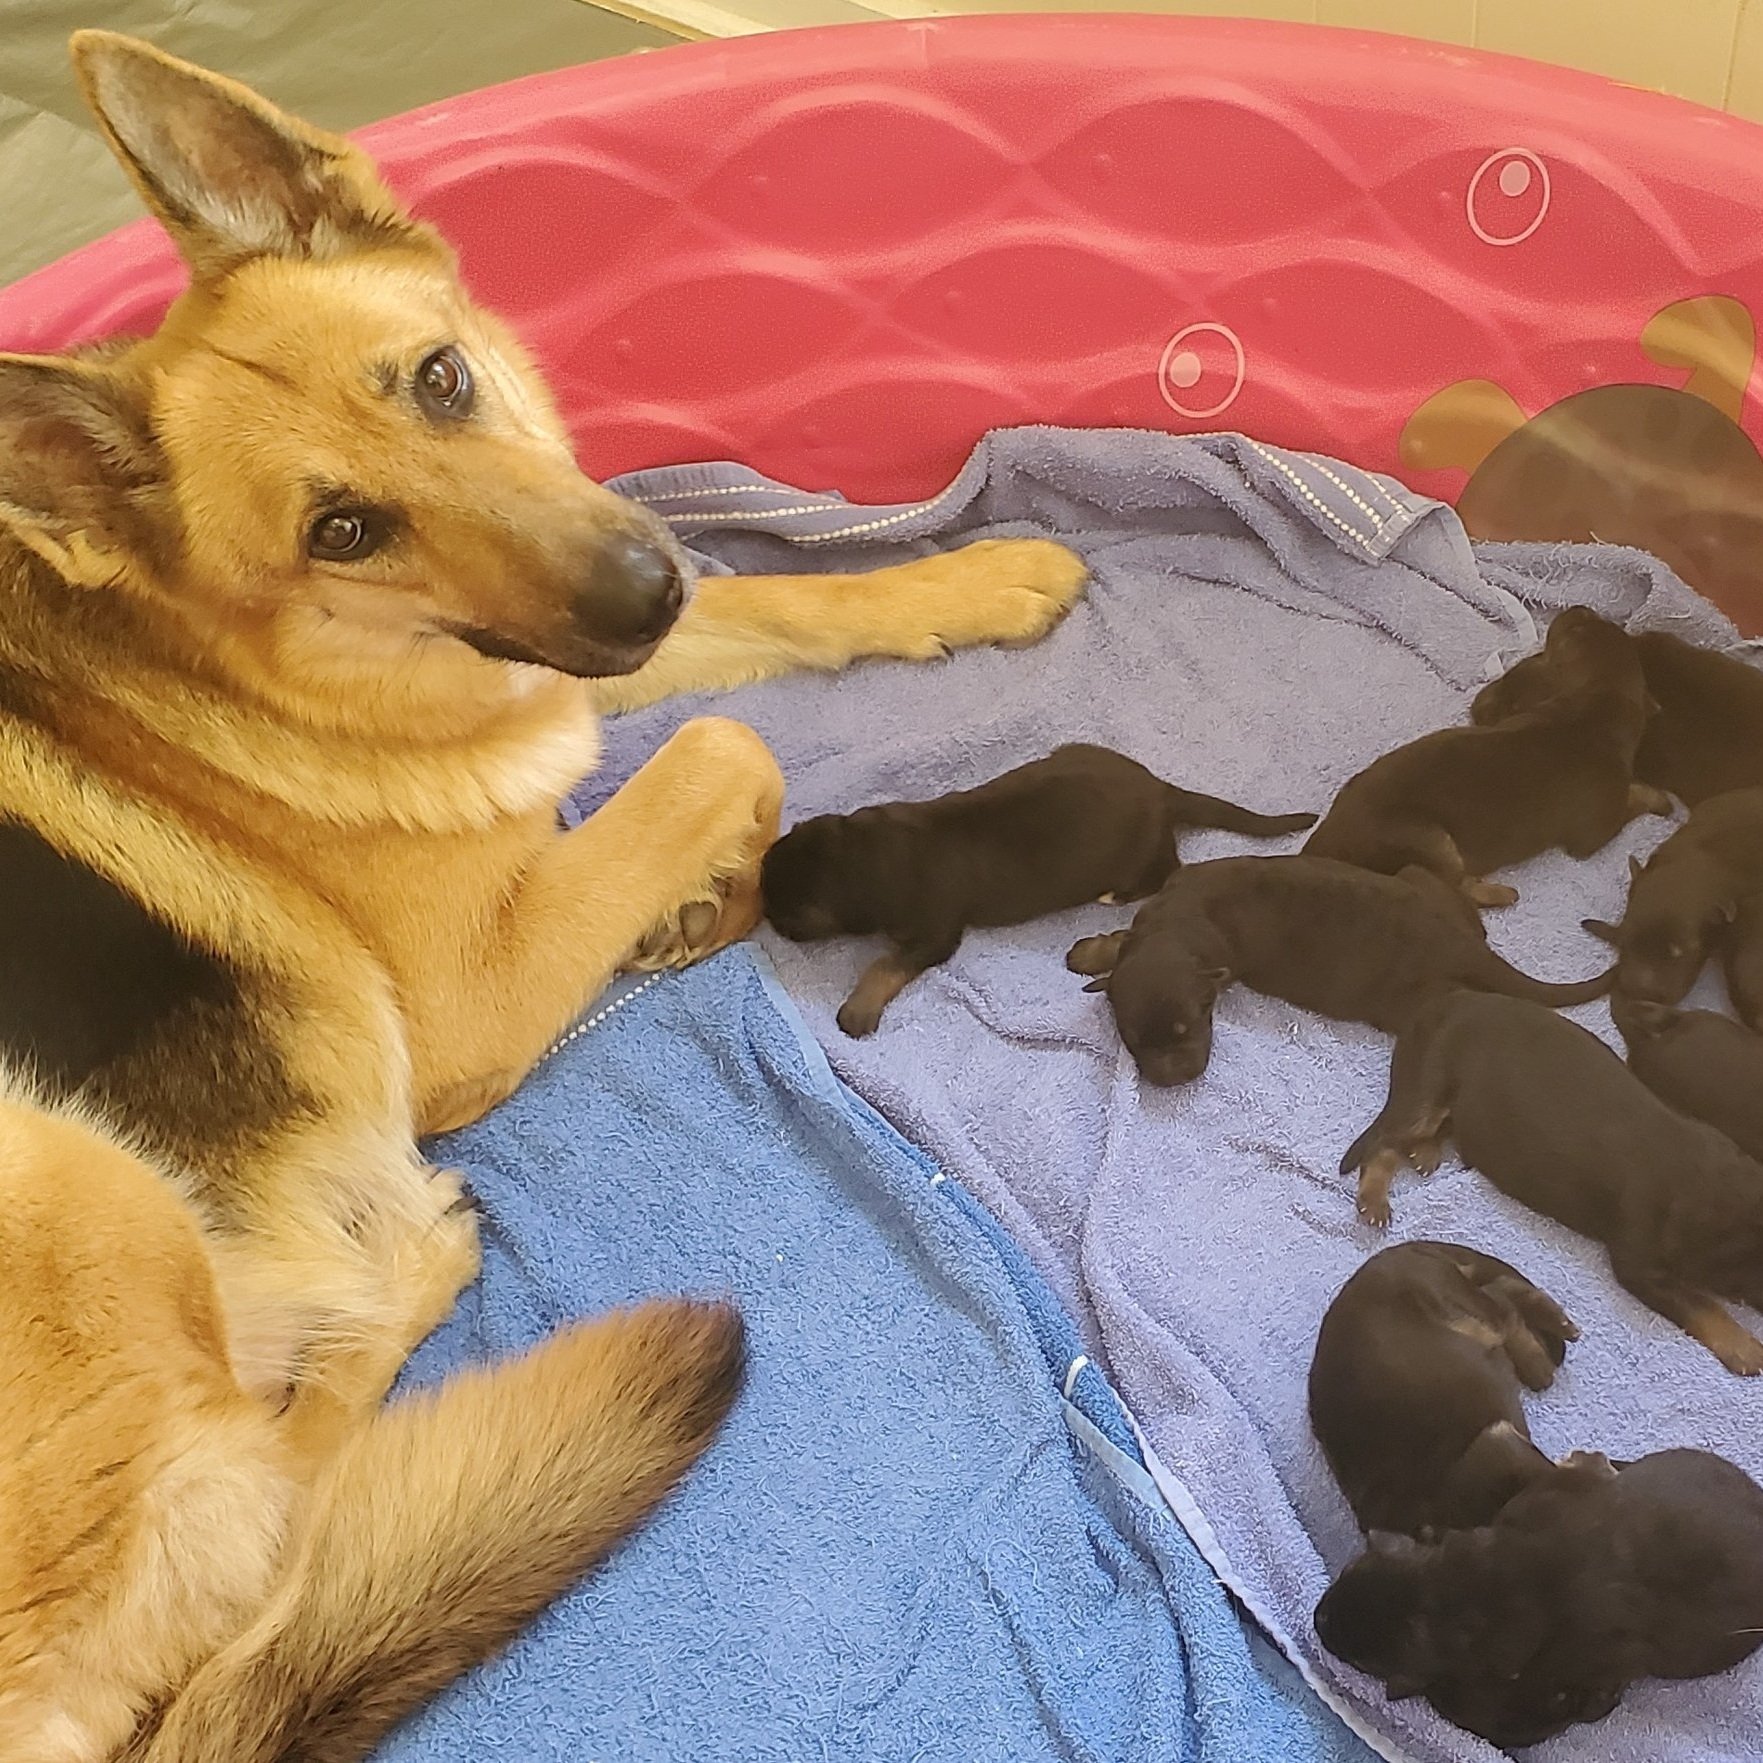 The Whole Litter on Day of Birth - 3-23-22